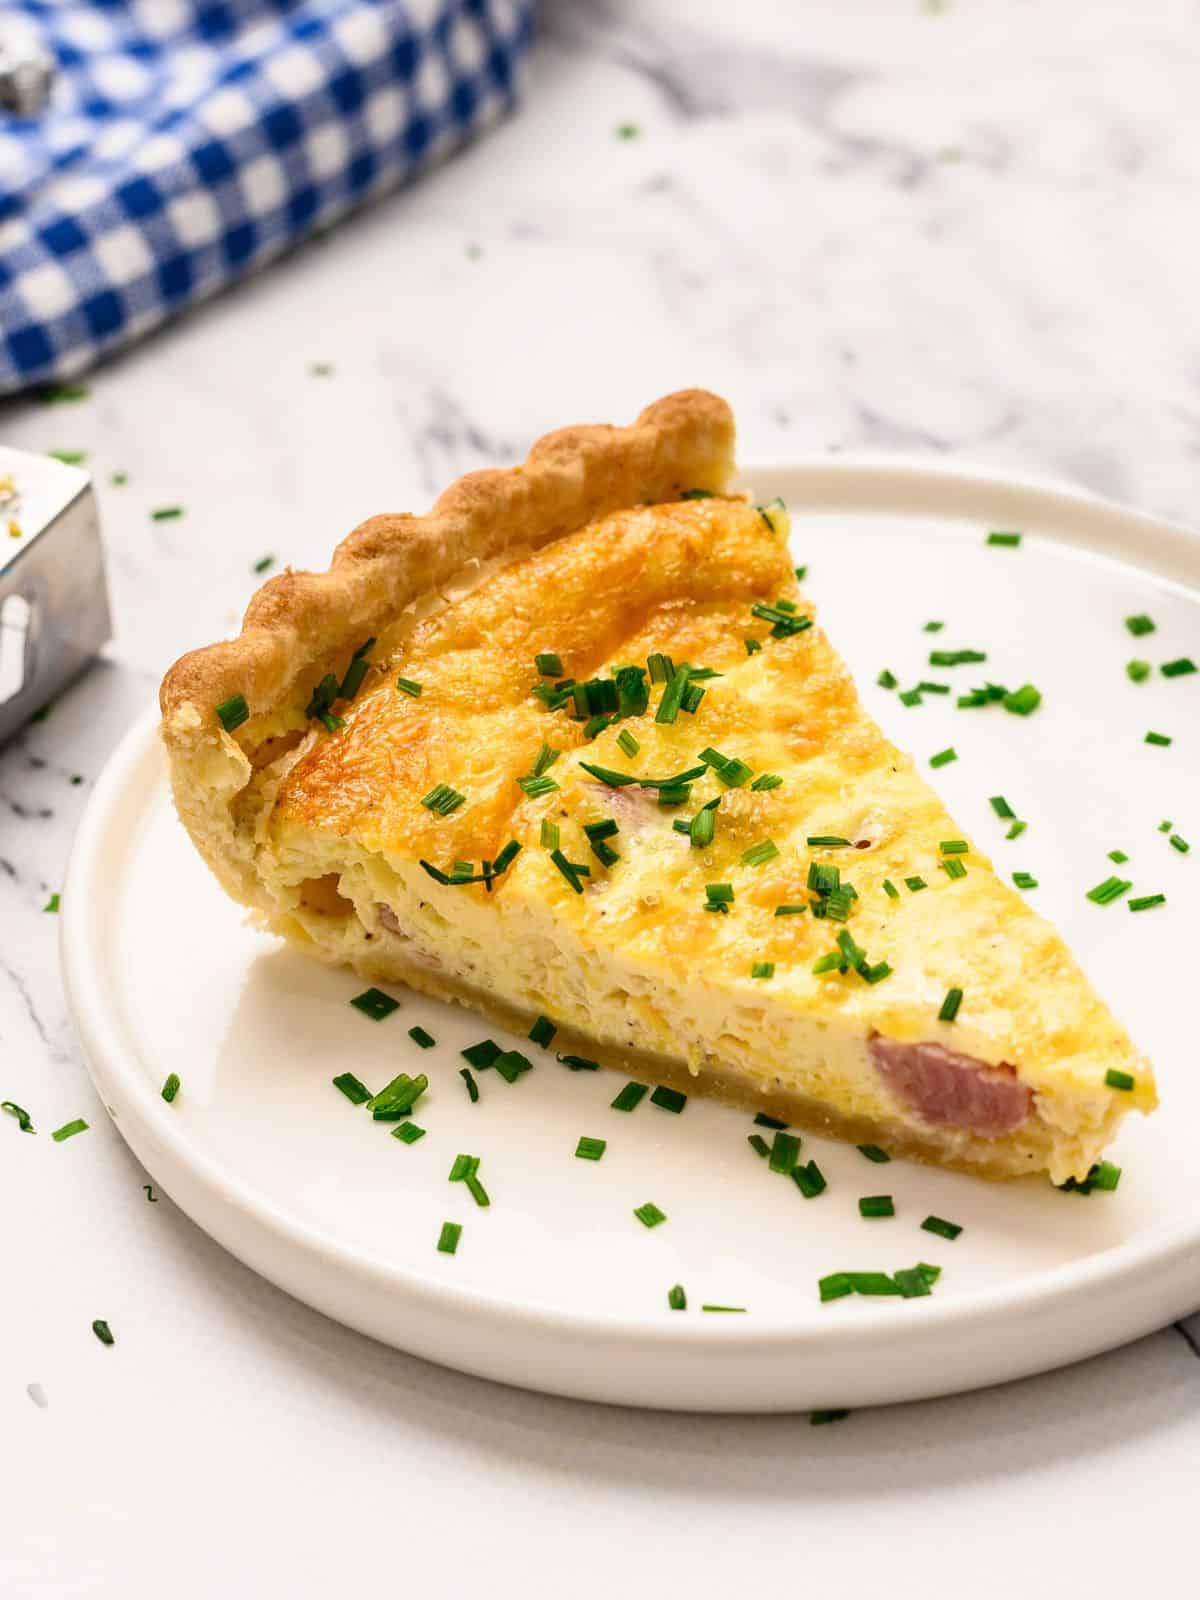 Slice of homemade quiche topped with chopped chives on white plate.